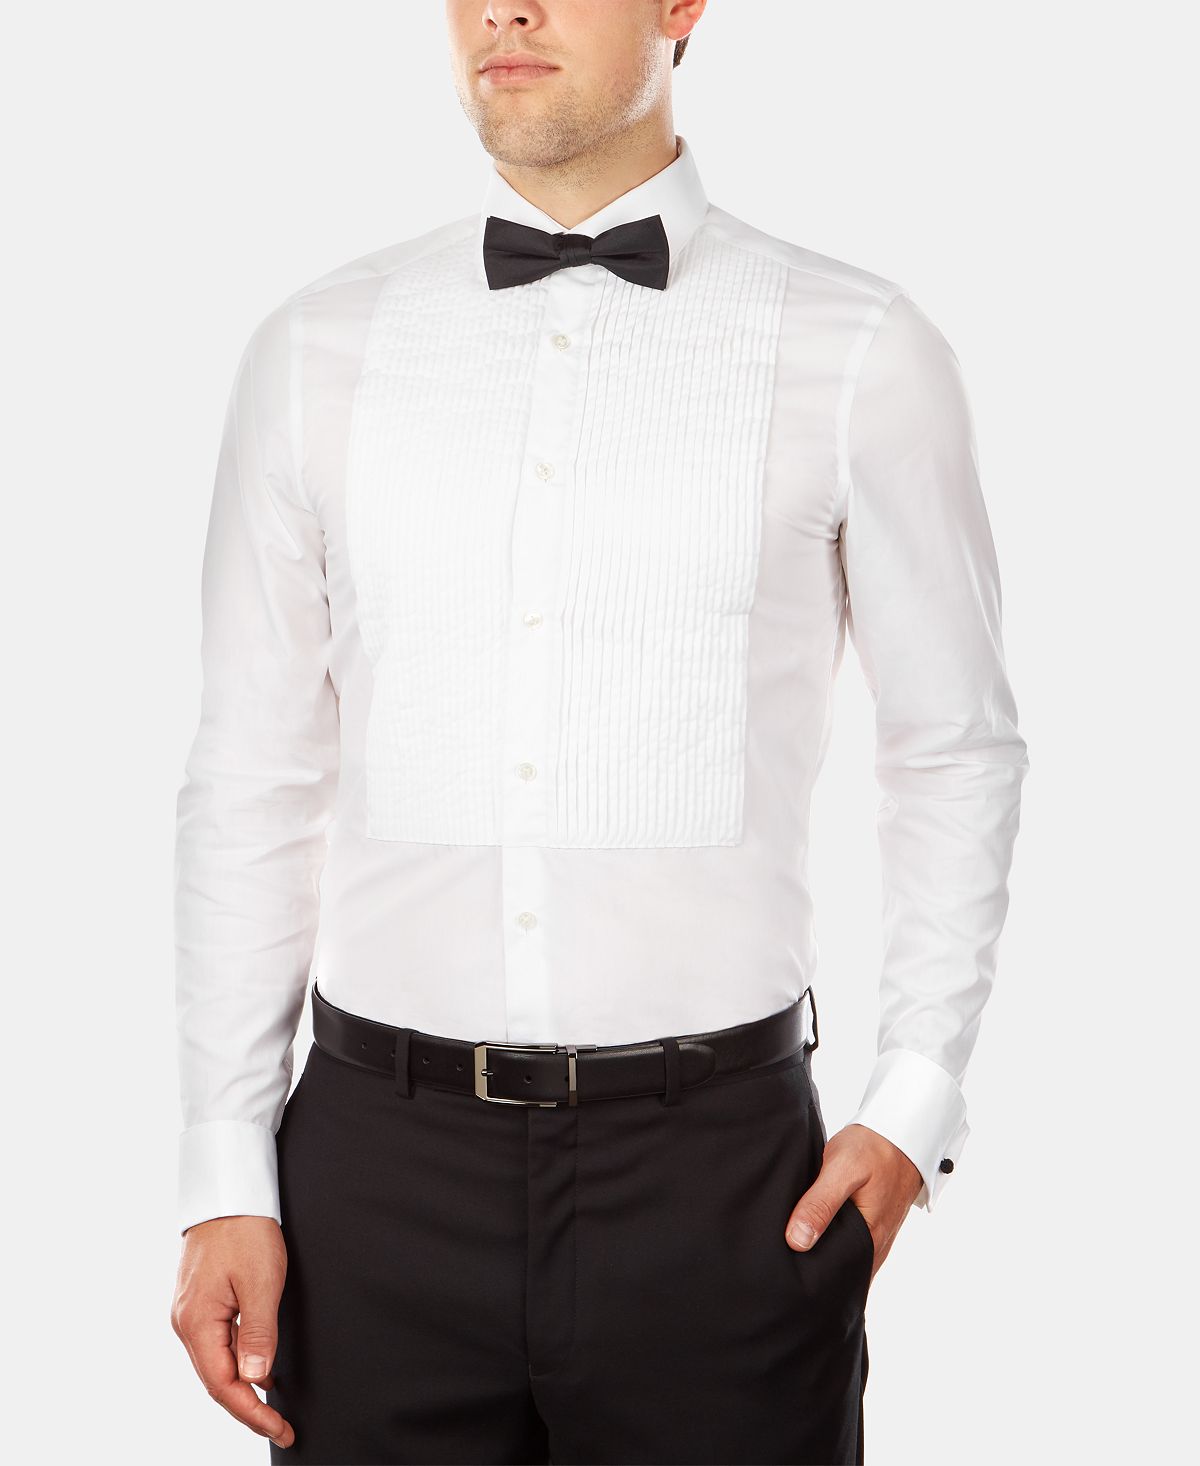 Calvin Klein Slim-fit Solid French Cuff Dress Shirt & Pre-tied Solid Bow Tie Set White